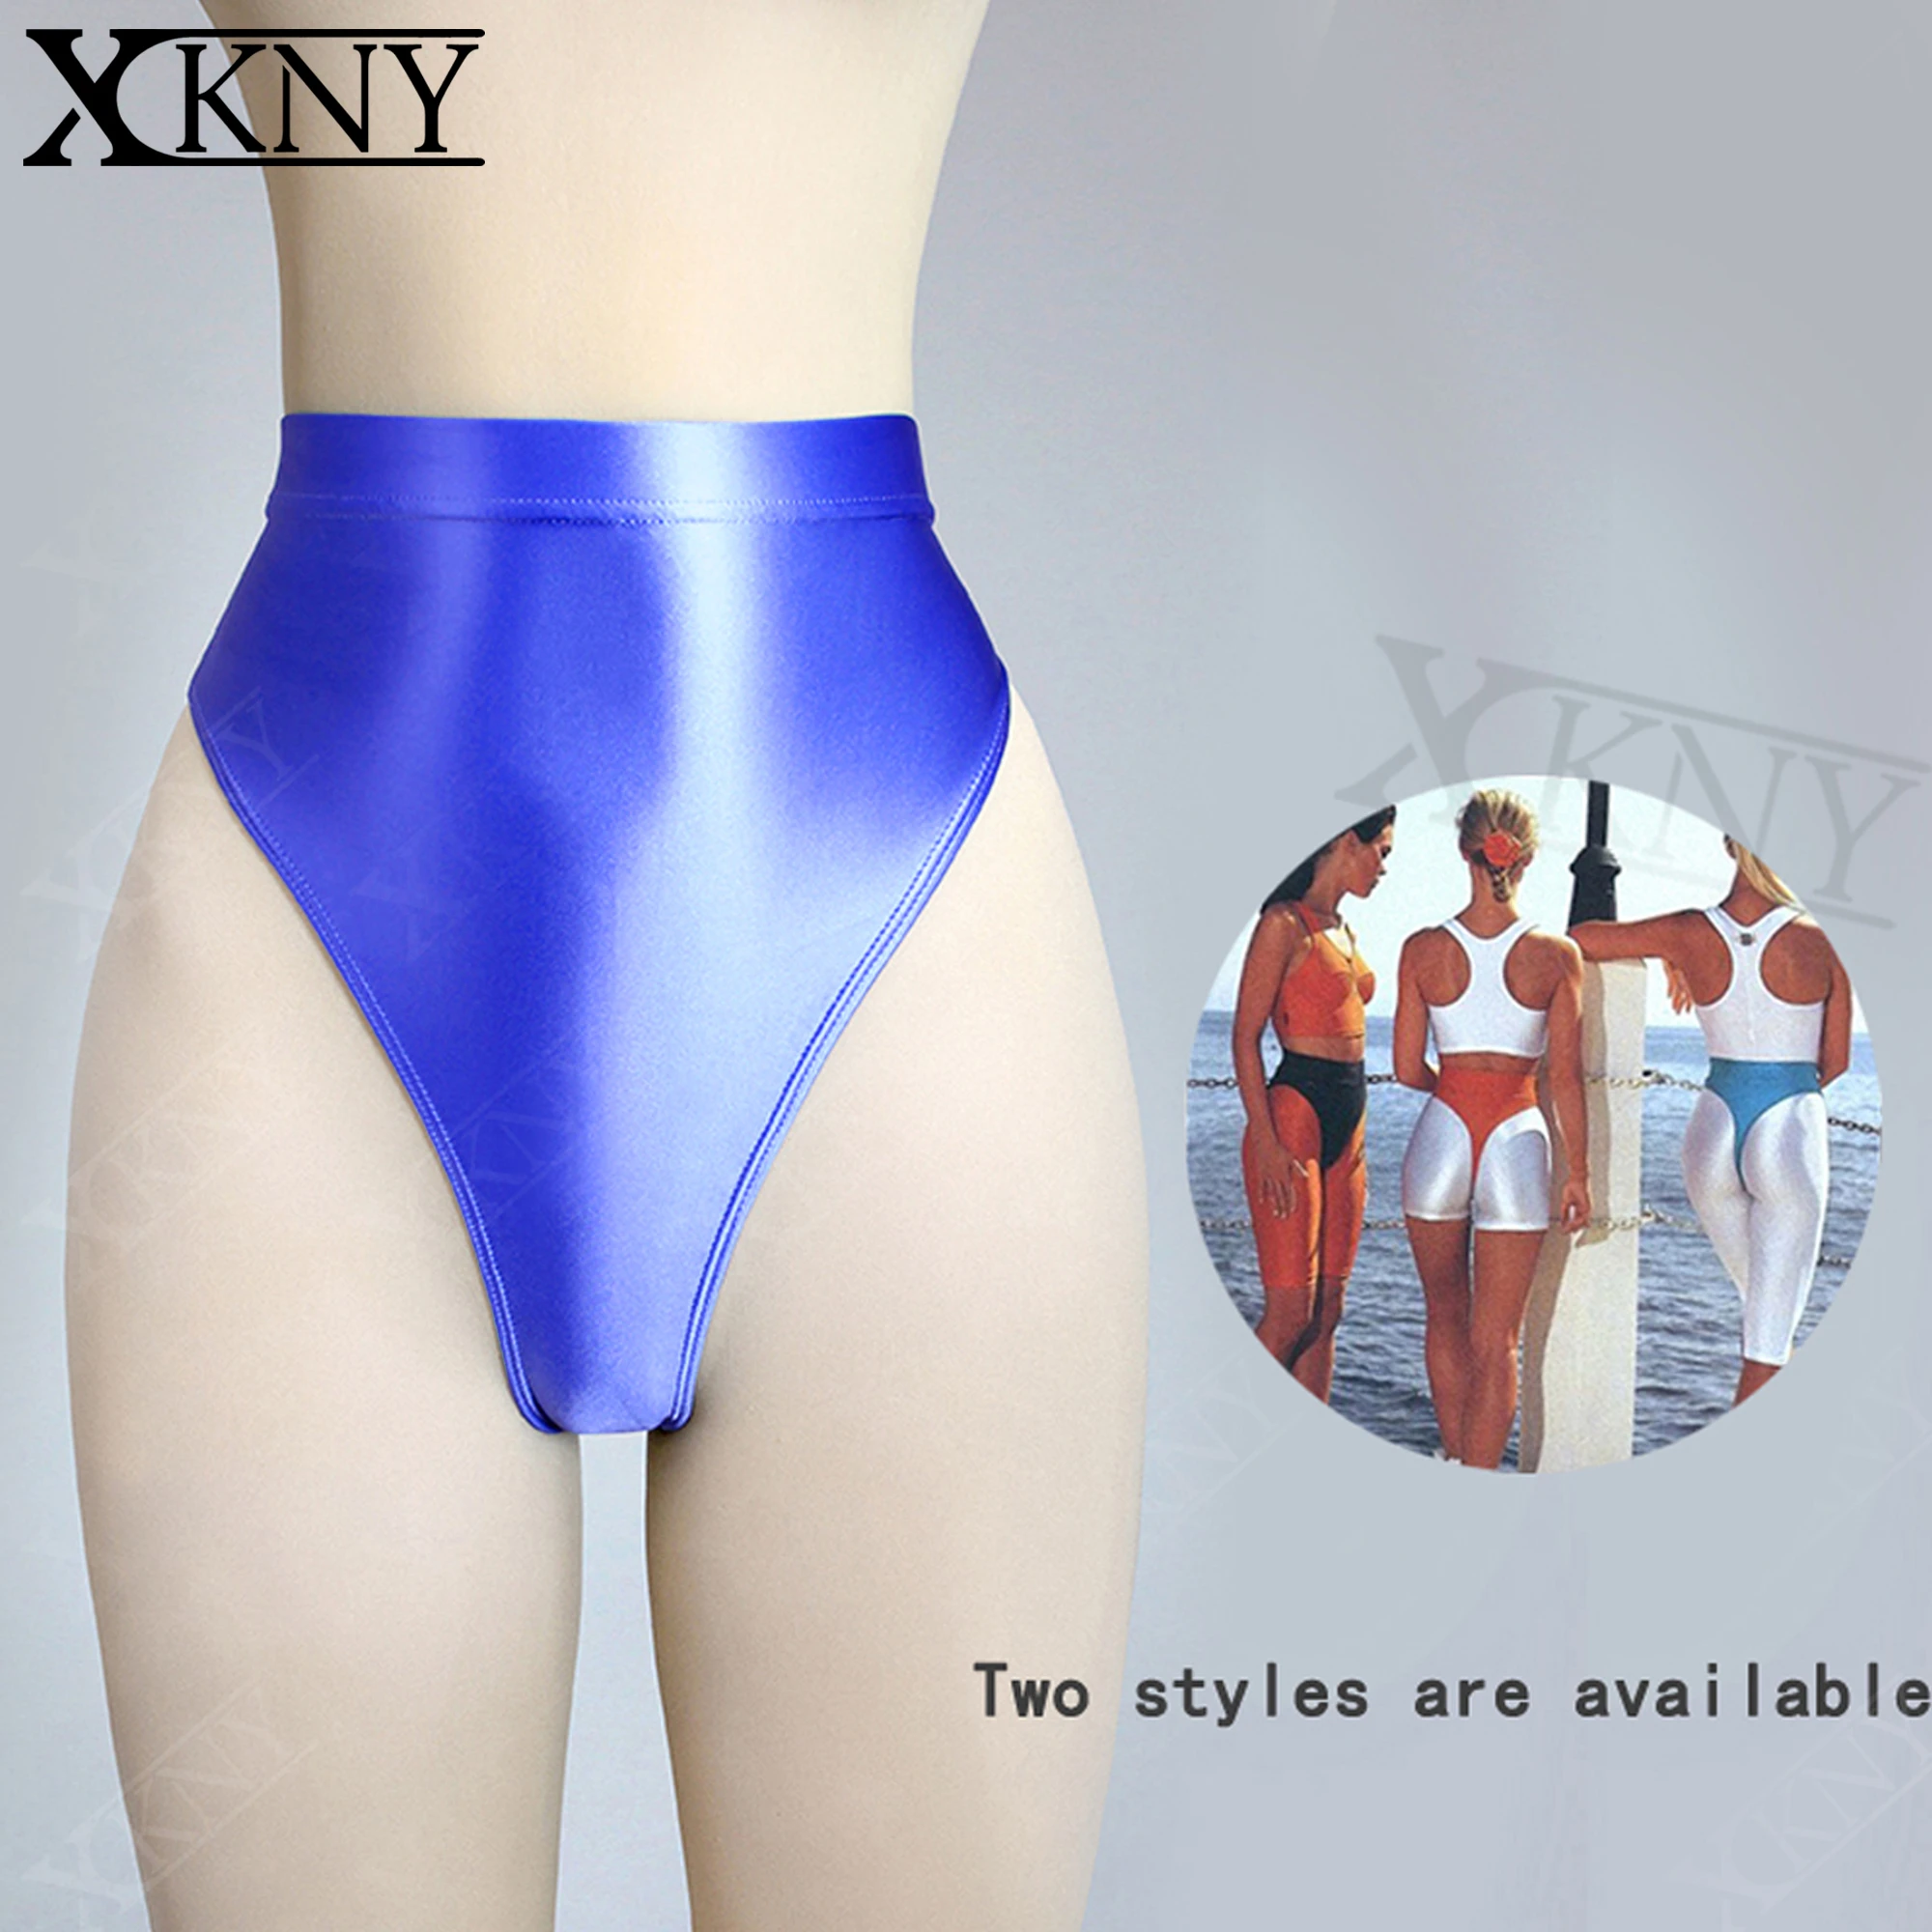 XCKNY glossy t-shaped pants with buttocks sexy solid bikini high waist sexy tights underpants and high fork briefs